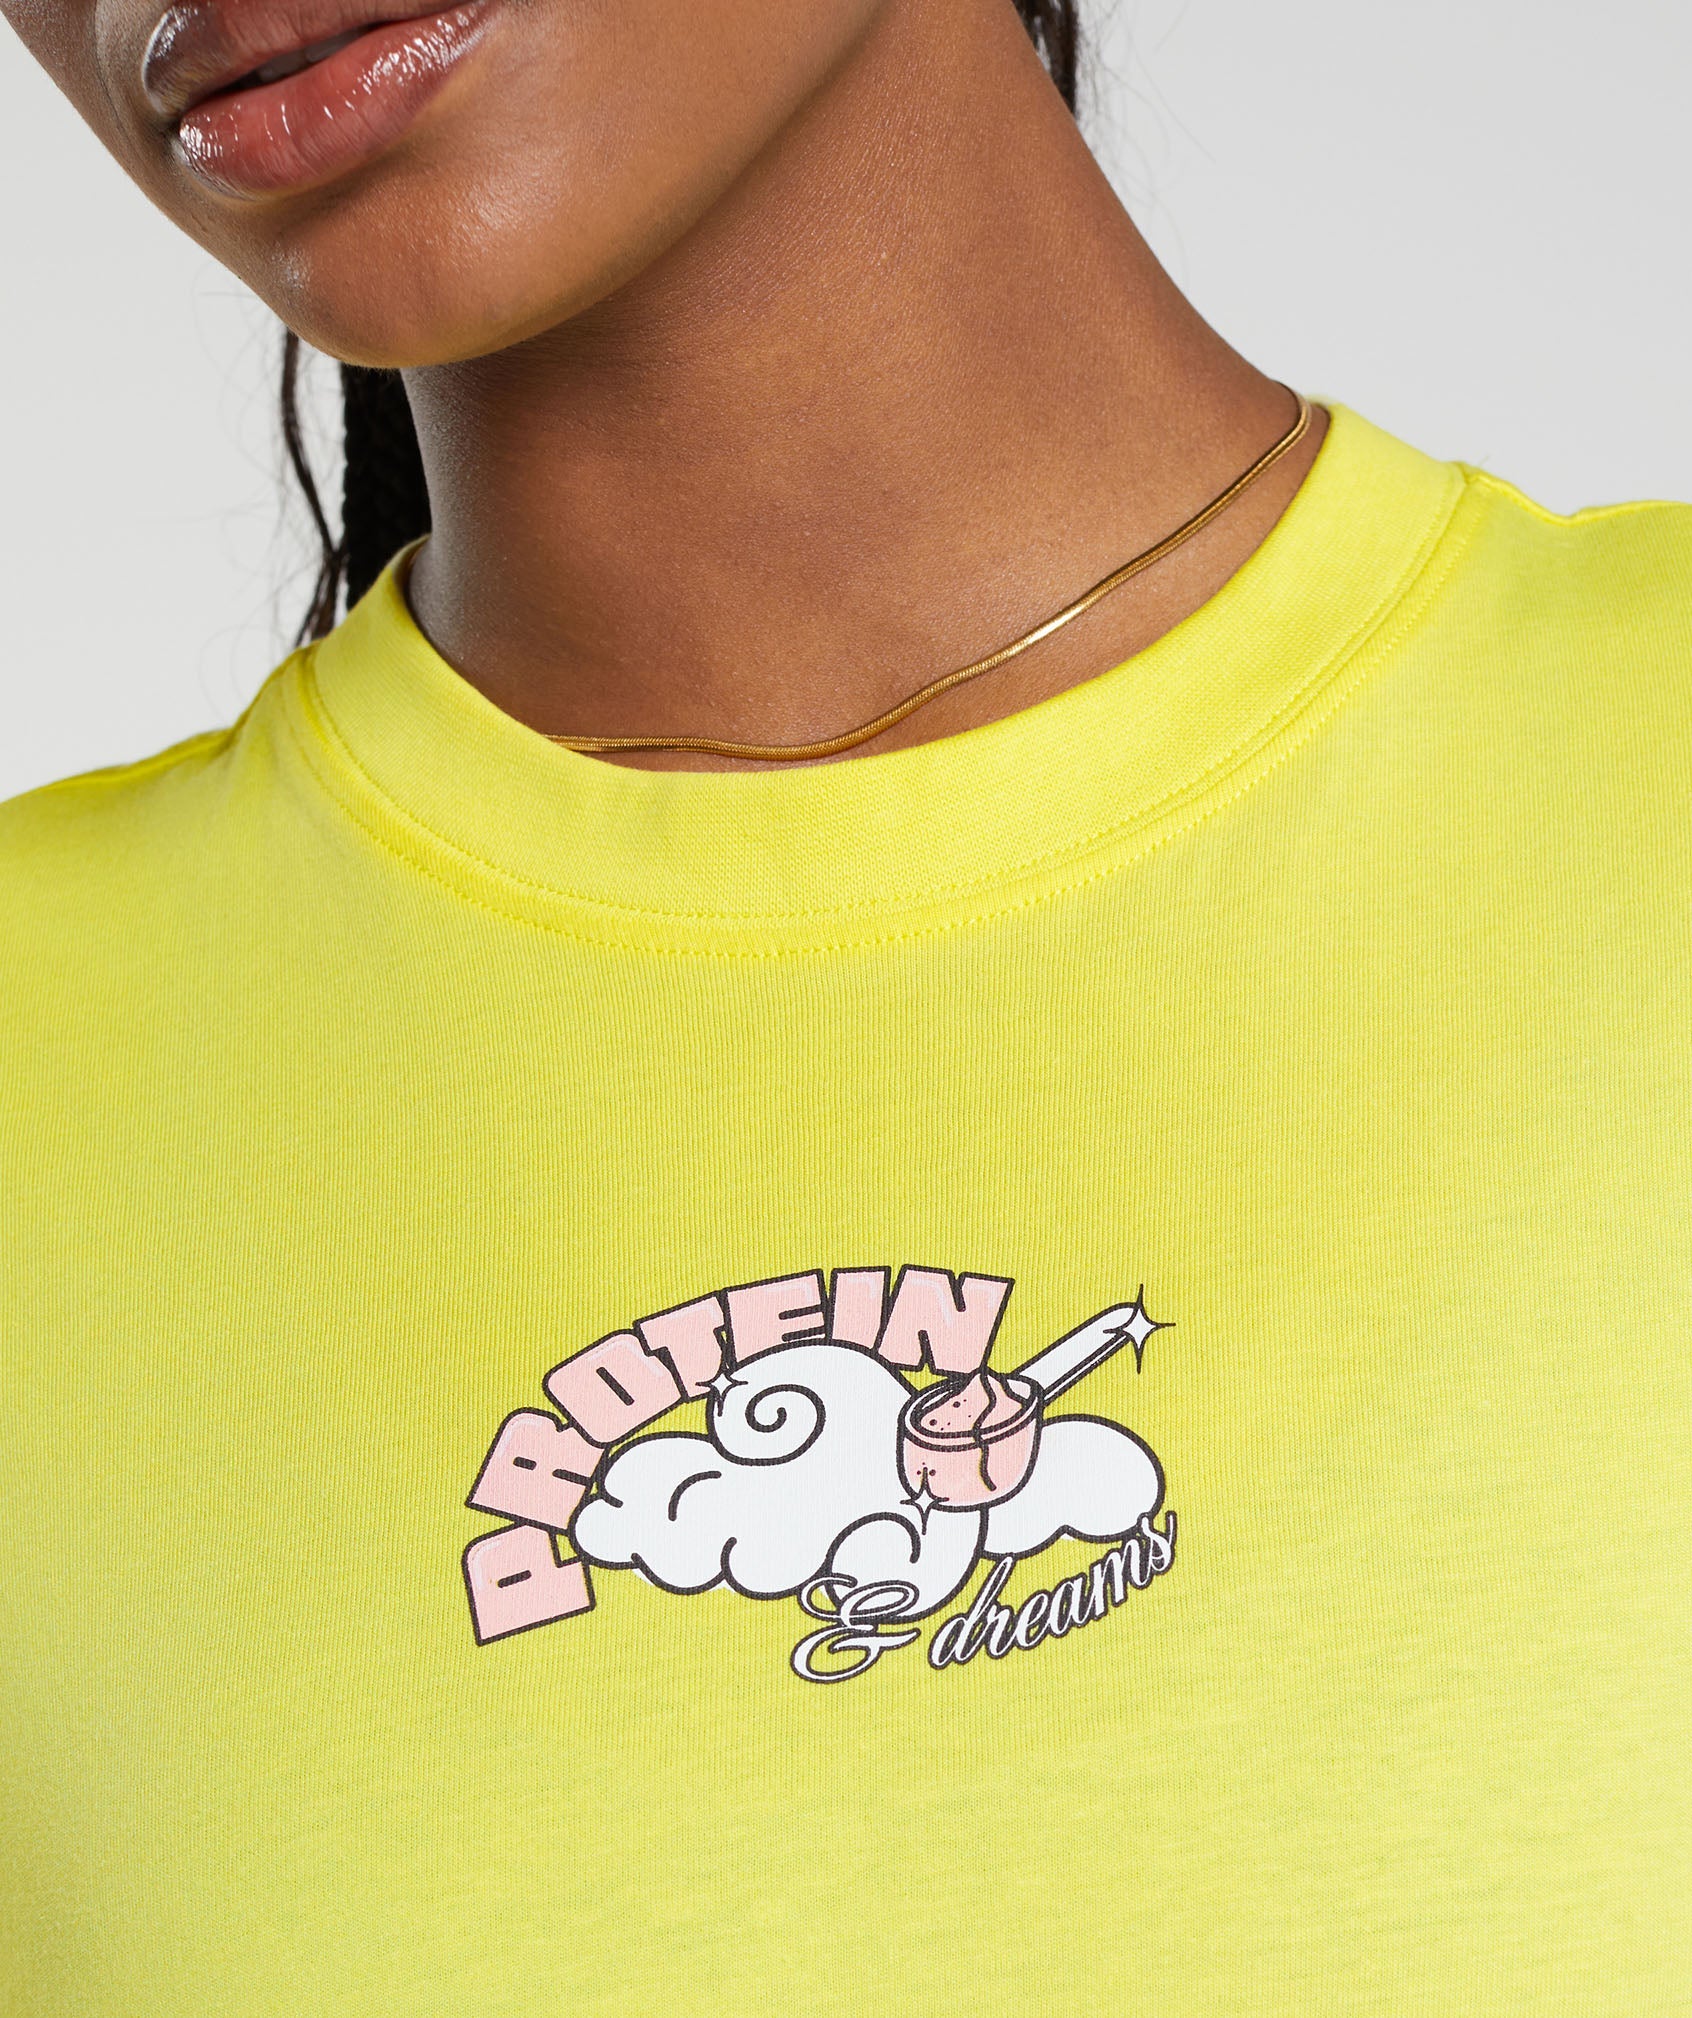 Protein & Dreams Oversized T-Shirt in Lemon Yellow - view 6